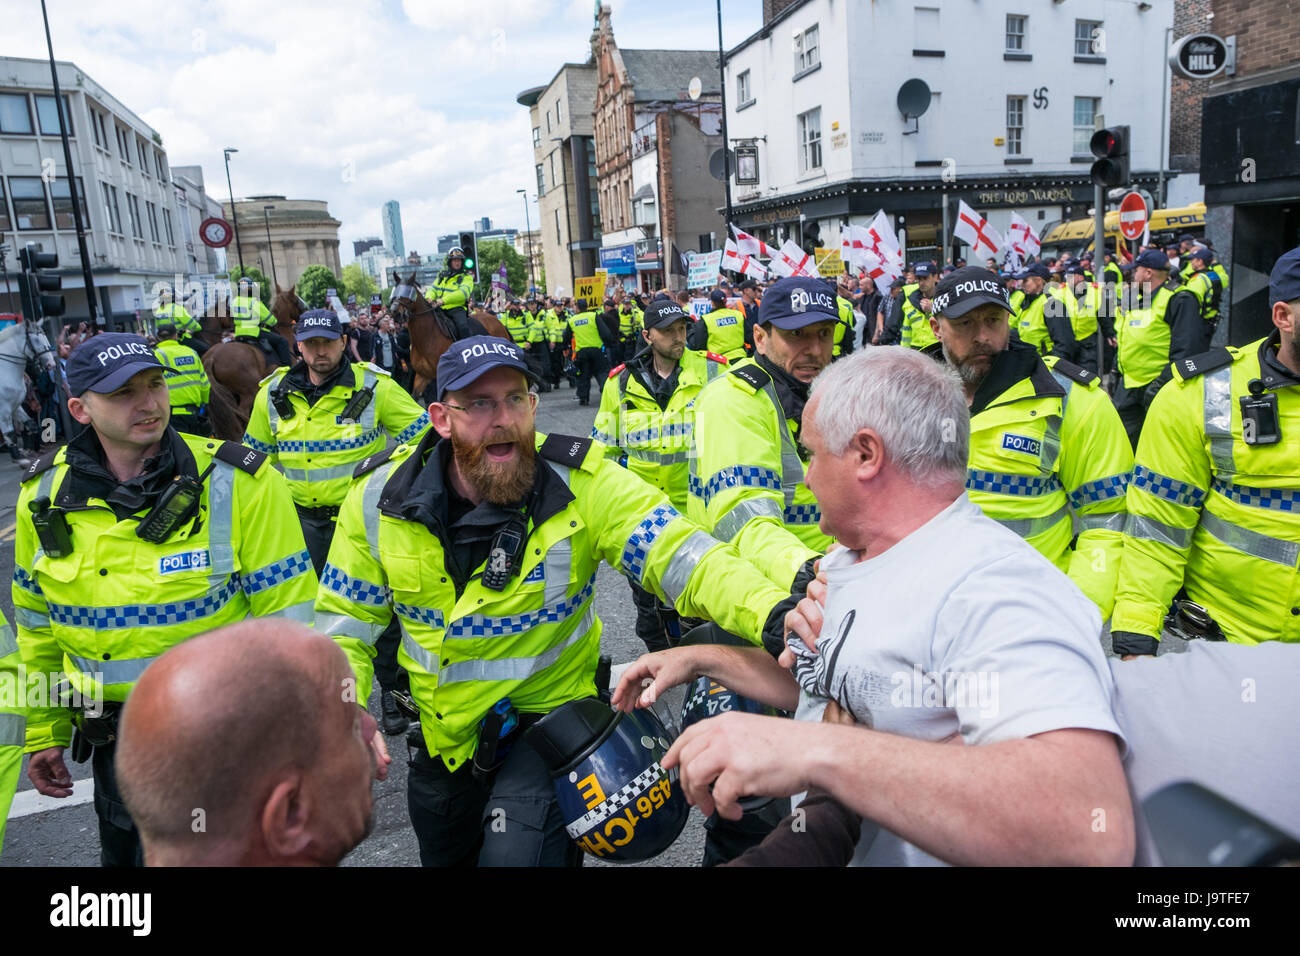 Liverpool, UK. 3rd June, 2017. English Defence League and anti-fascist protesters have clashed in Liverpool city centre on Saturday, June 3, 2017. © Christopher Middleton/Alamy Live News Stock Photo